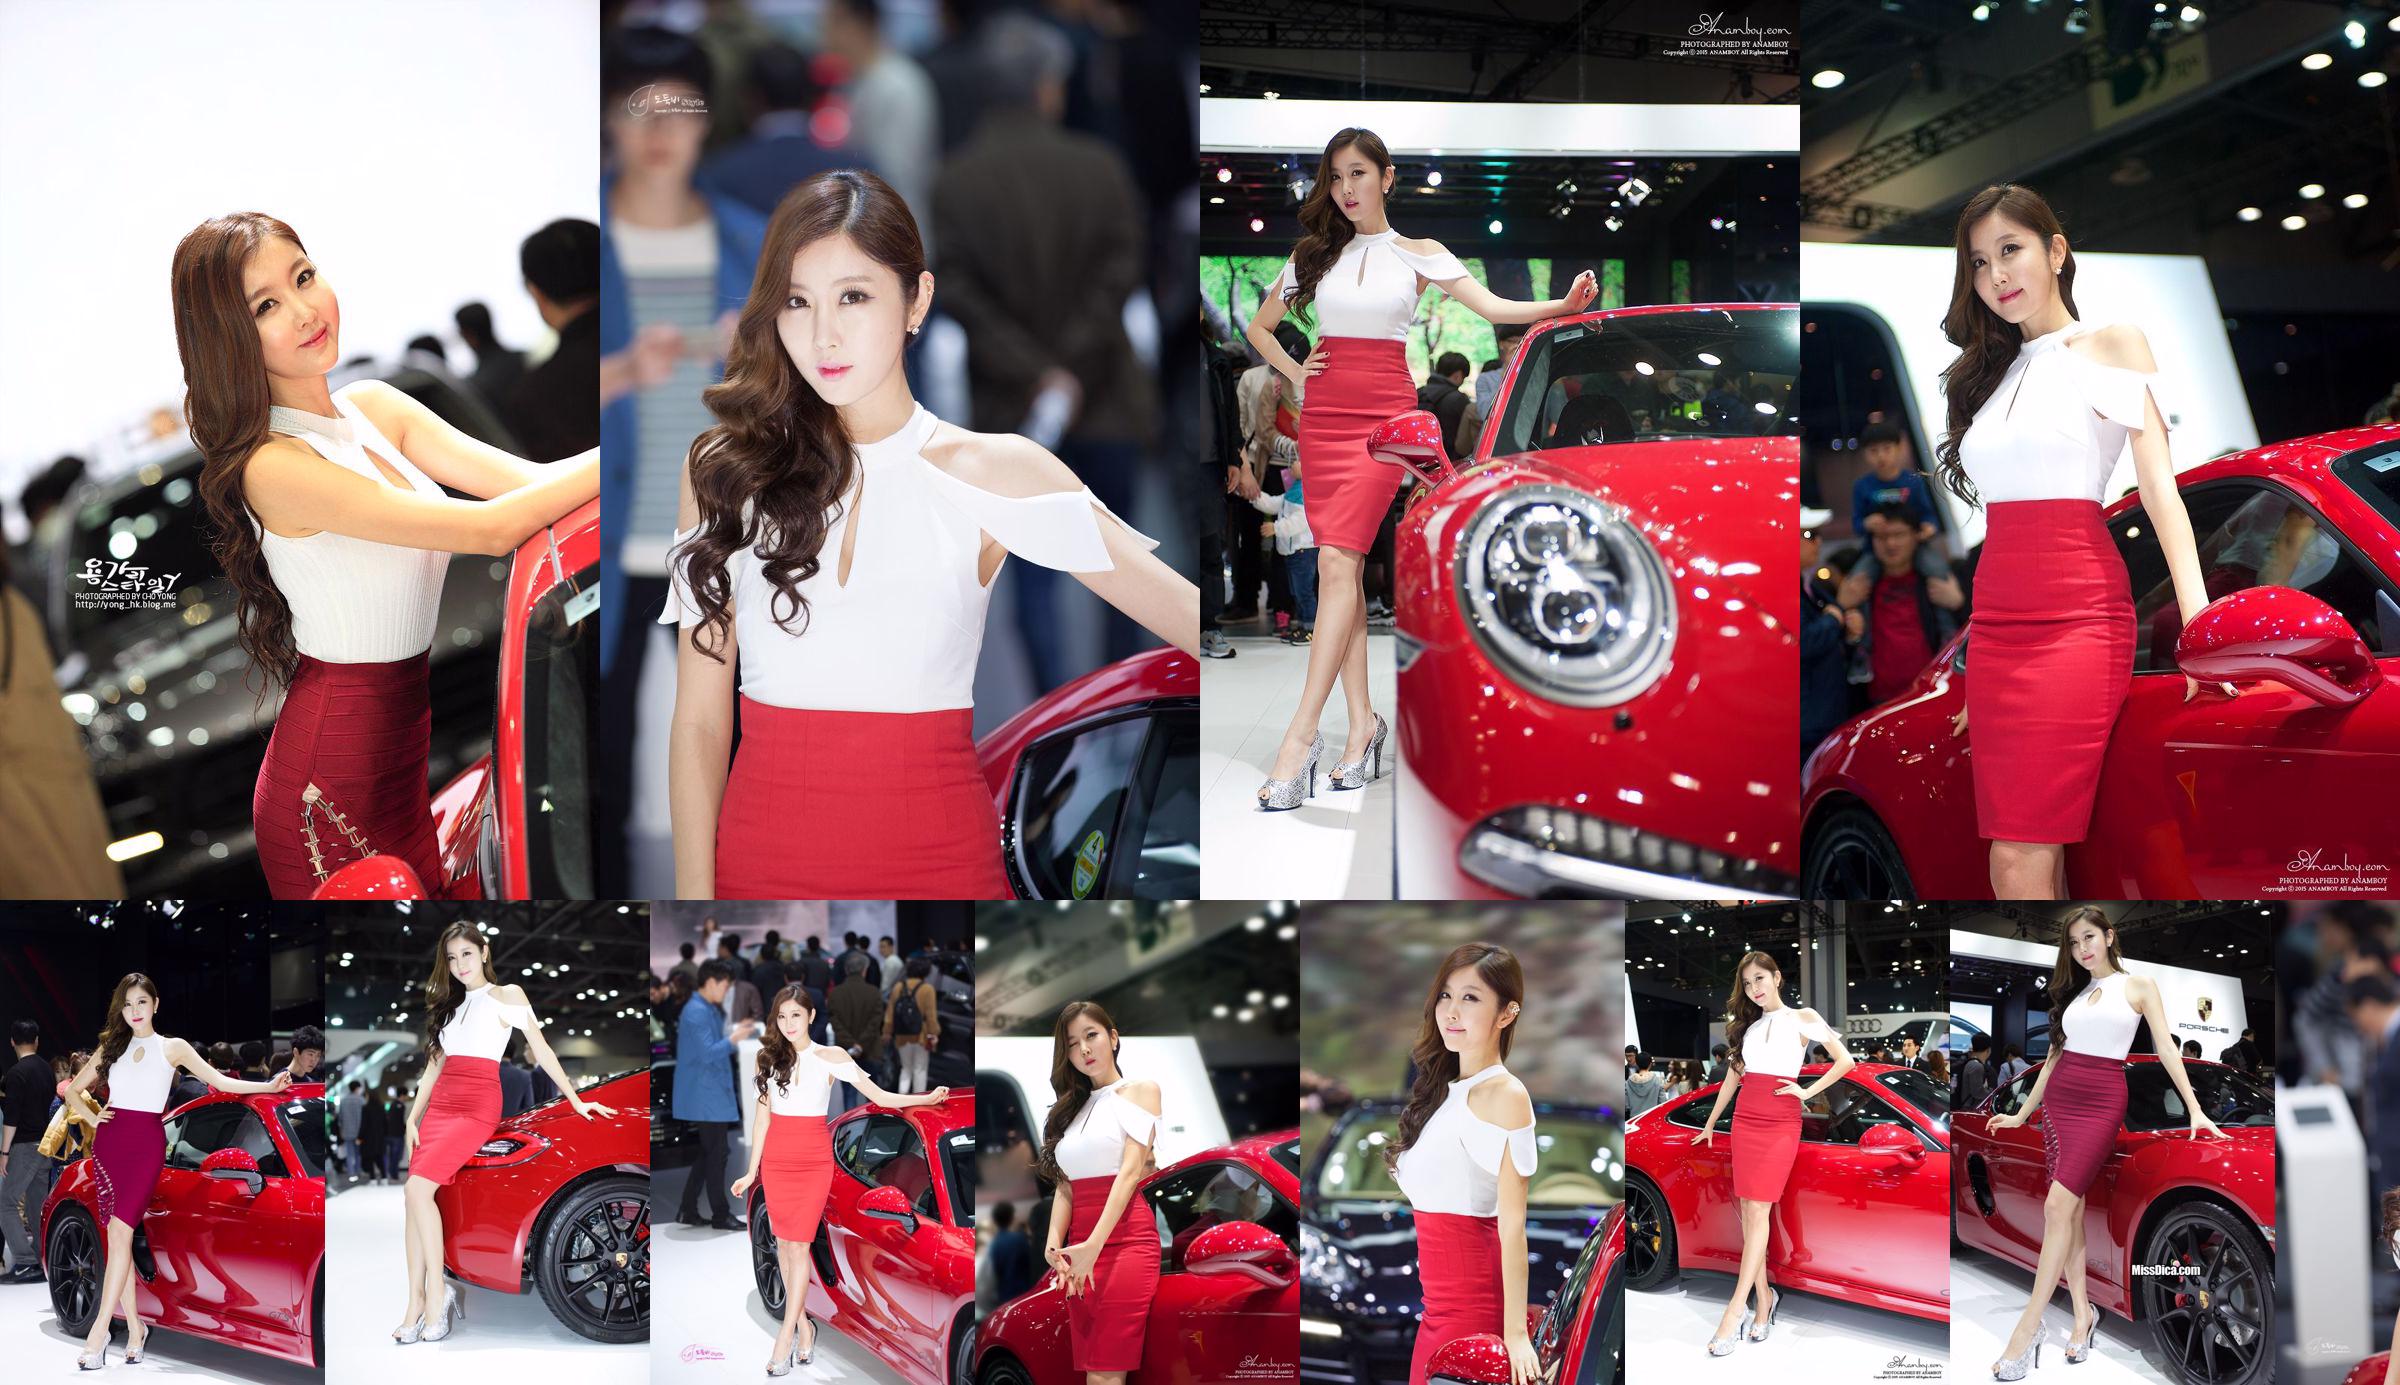 Photo Collection of Korean Car Model Cui Xingya/Cui Xinger's "Red Skirt Series at Auto Show" No.cb4094 Page 2